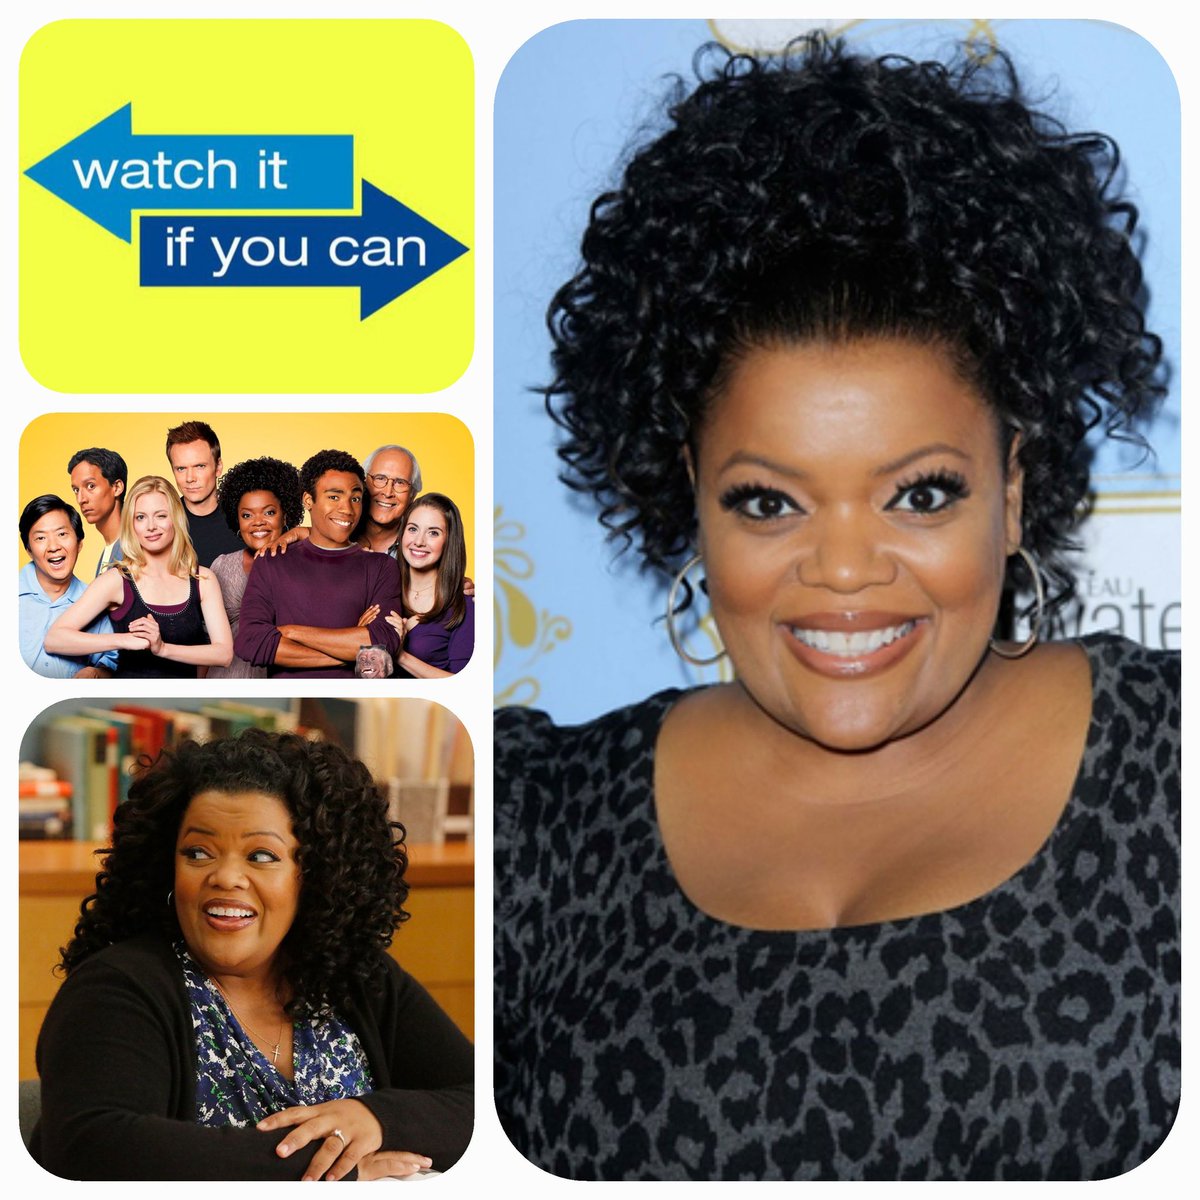 📢 'Shout Out' - Its Yvette Nicole Brown's birthday!...oh that's nice! 🎁

#YvetteNicoleBrown @YNB 
#Community #birthday #today